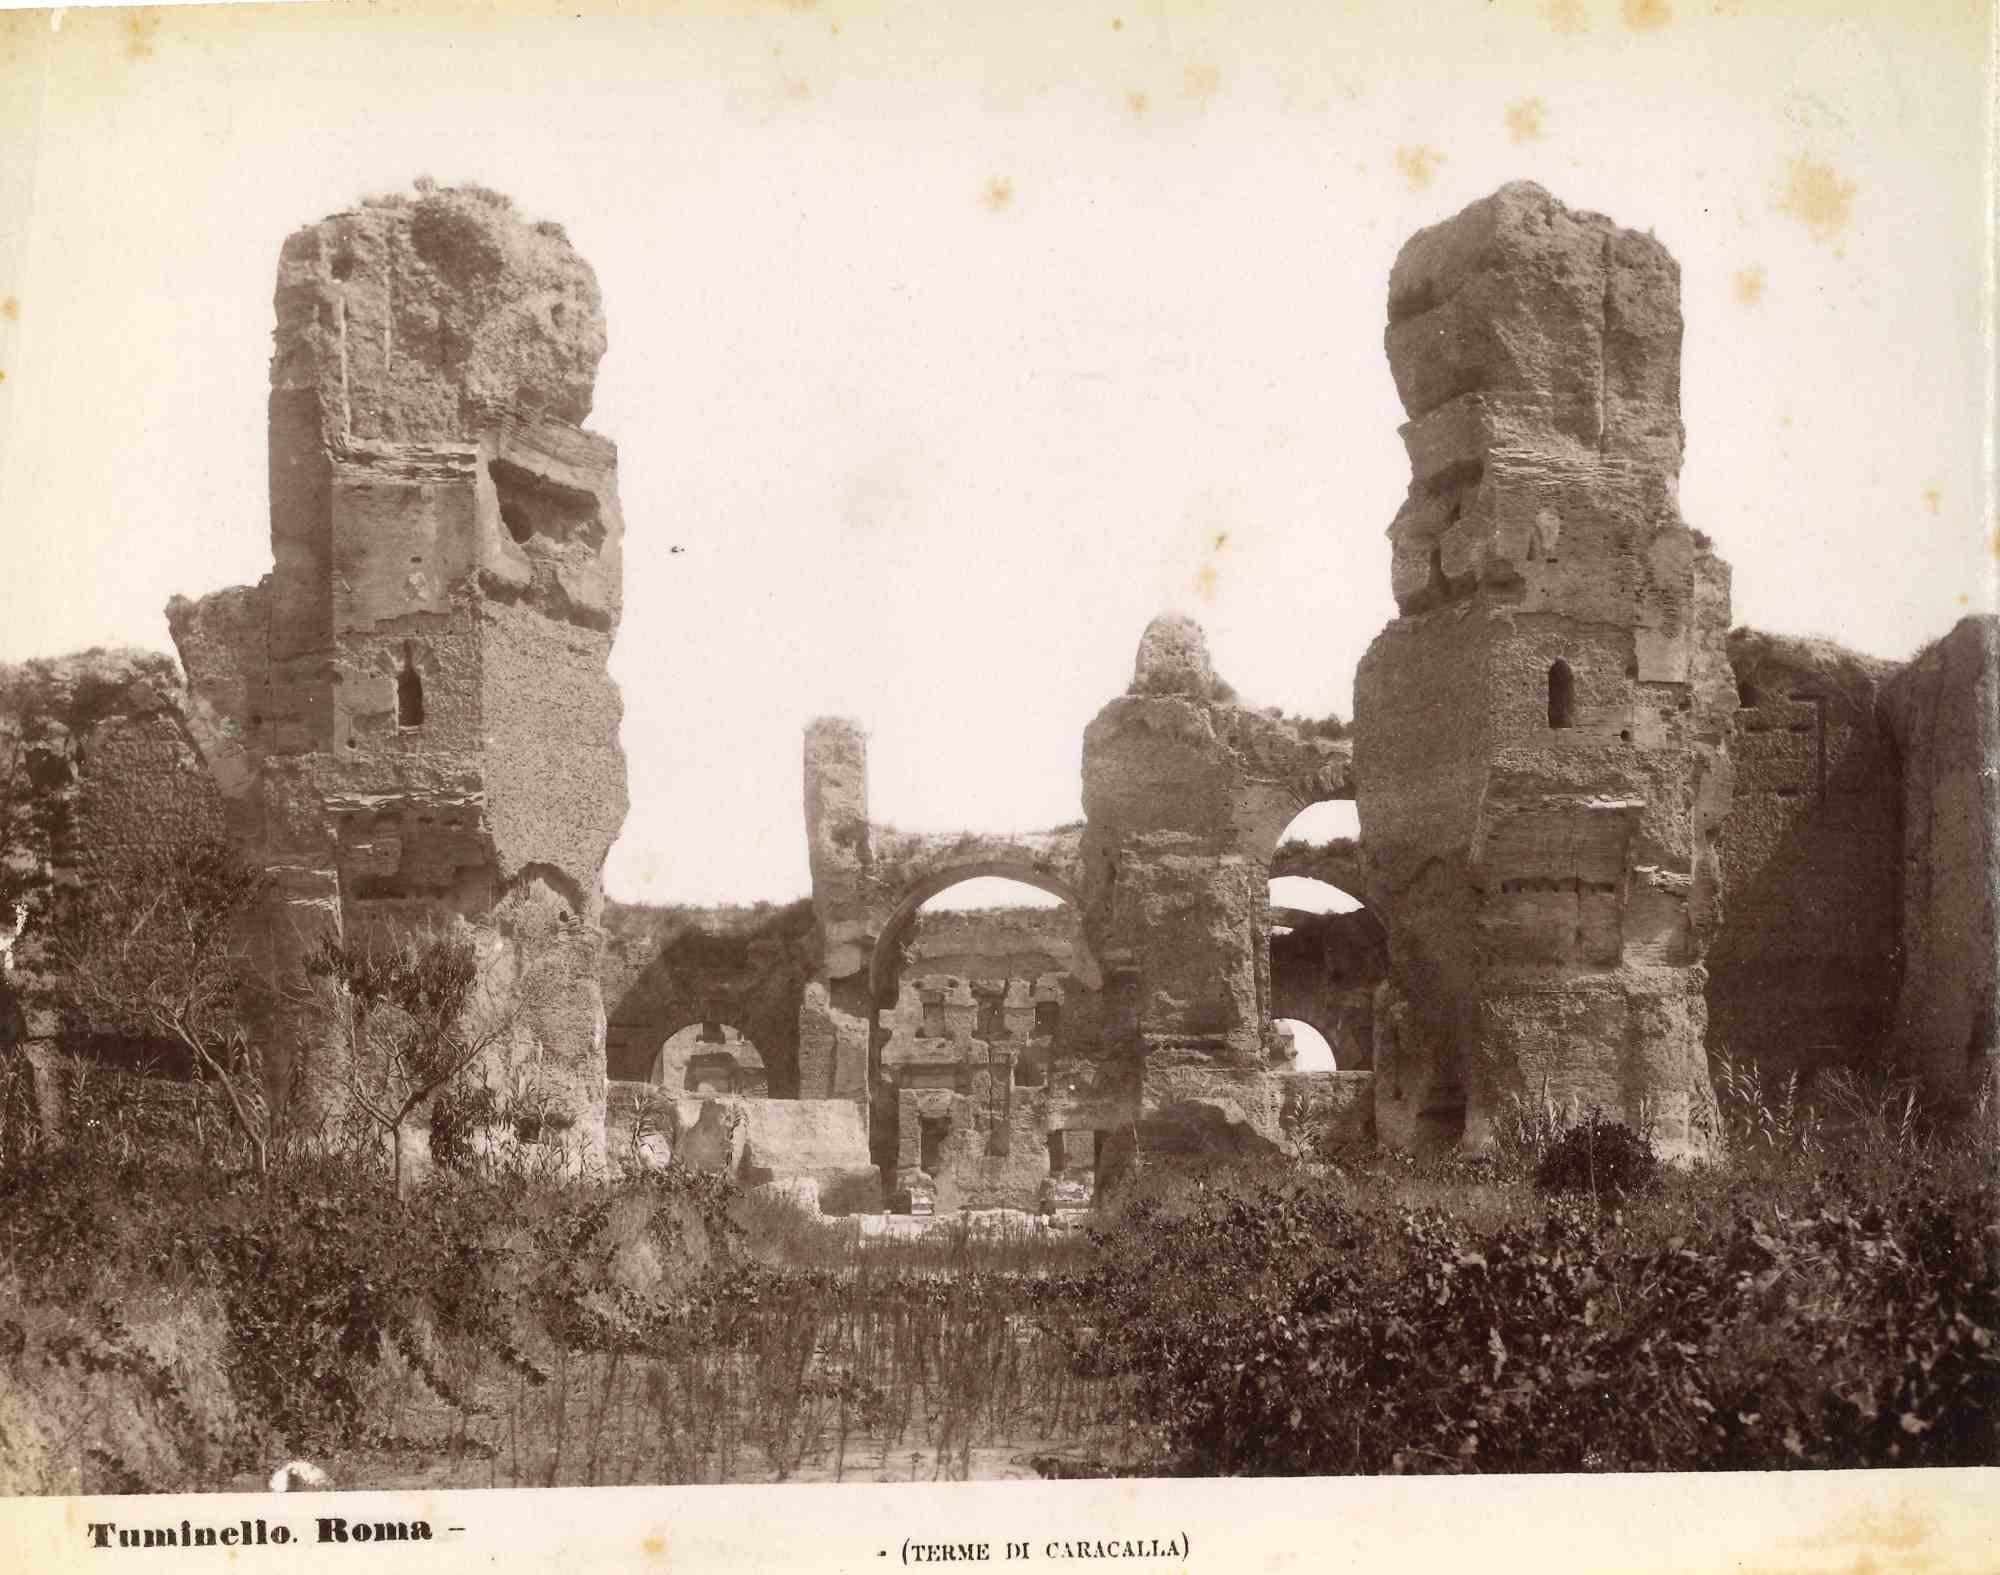 Baths of Caracalla is a vintage sepia photograph realized by Ludovico Tuminello in the early 20th Century.

Titled on the lower.

Good conditions except for some foxing.